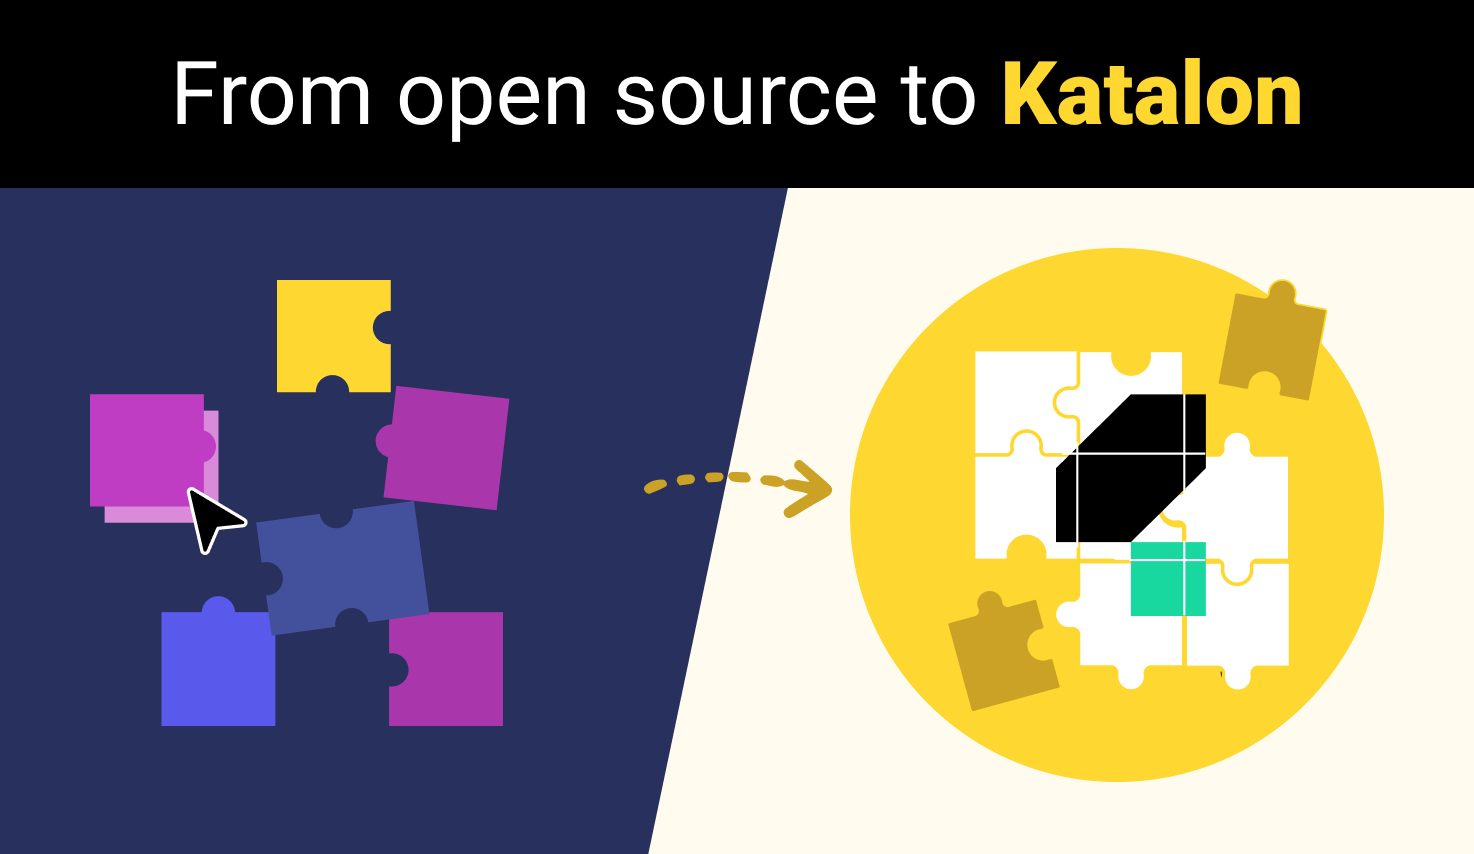 From open source to Katalon